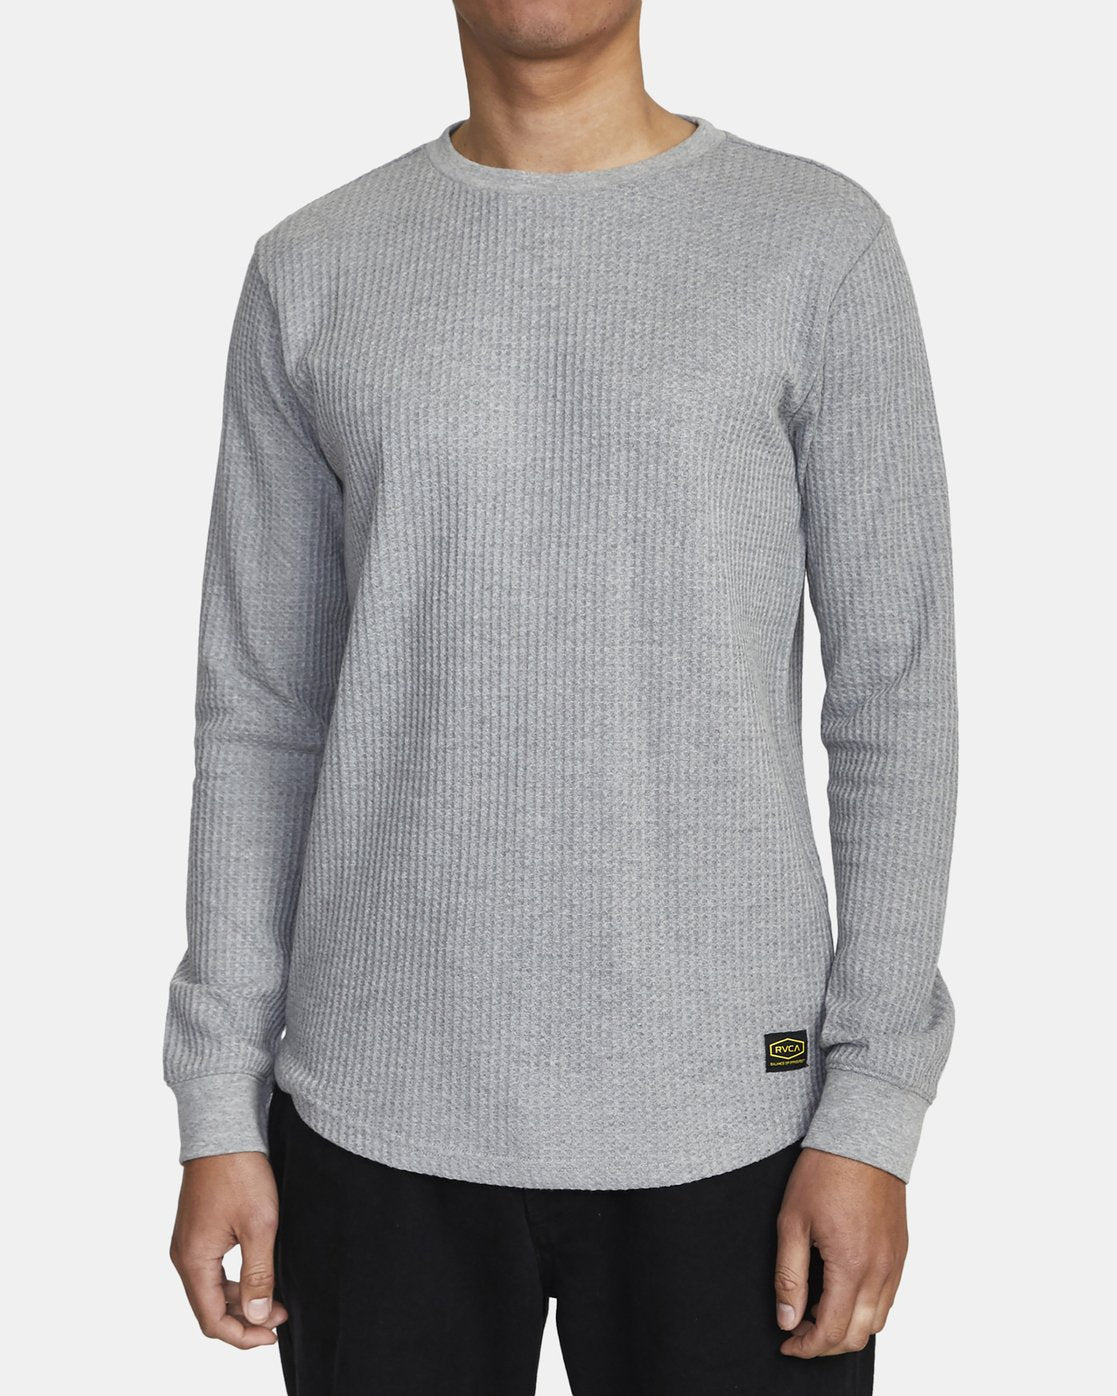 RVCA DAY SHIFT THERMAL LS GREY NOISE